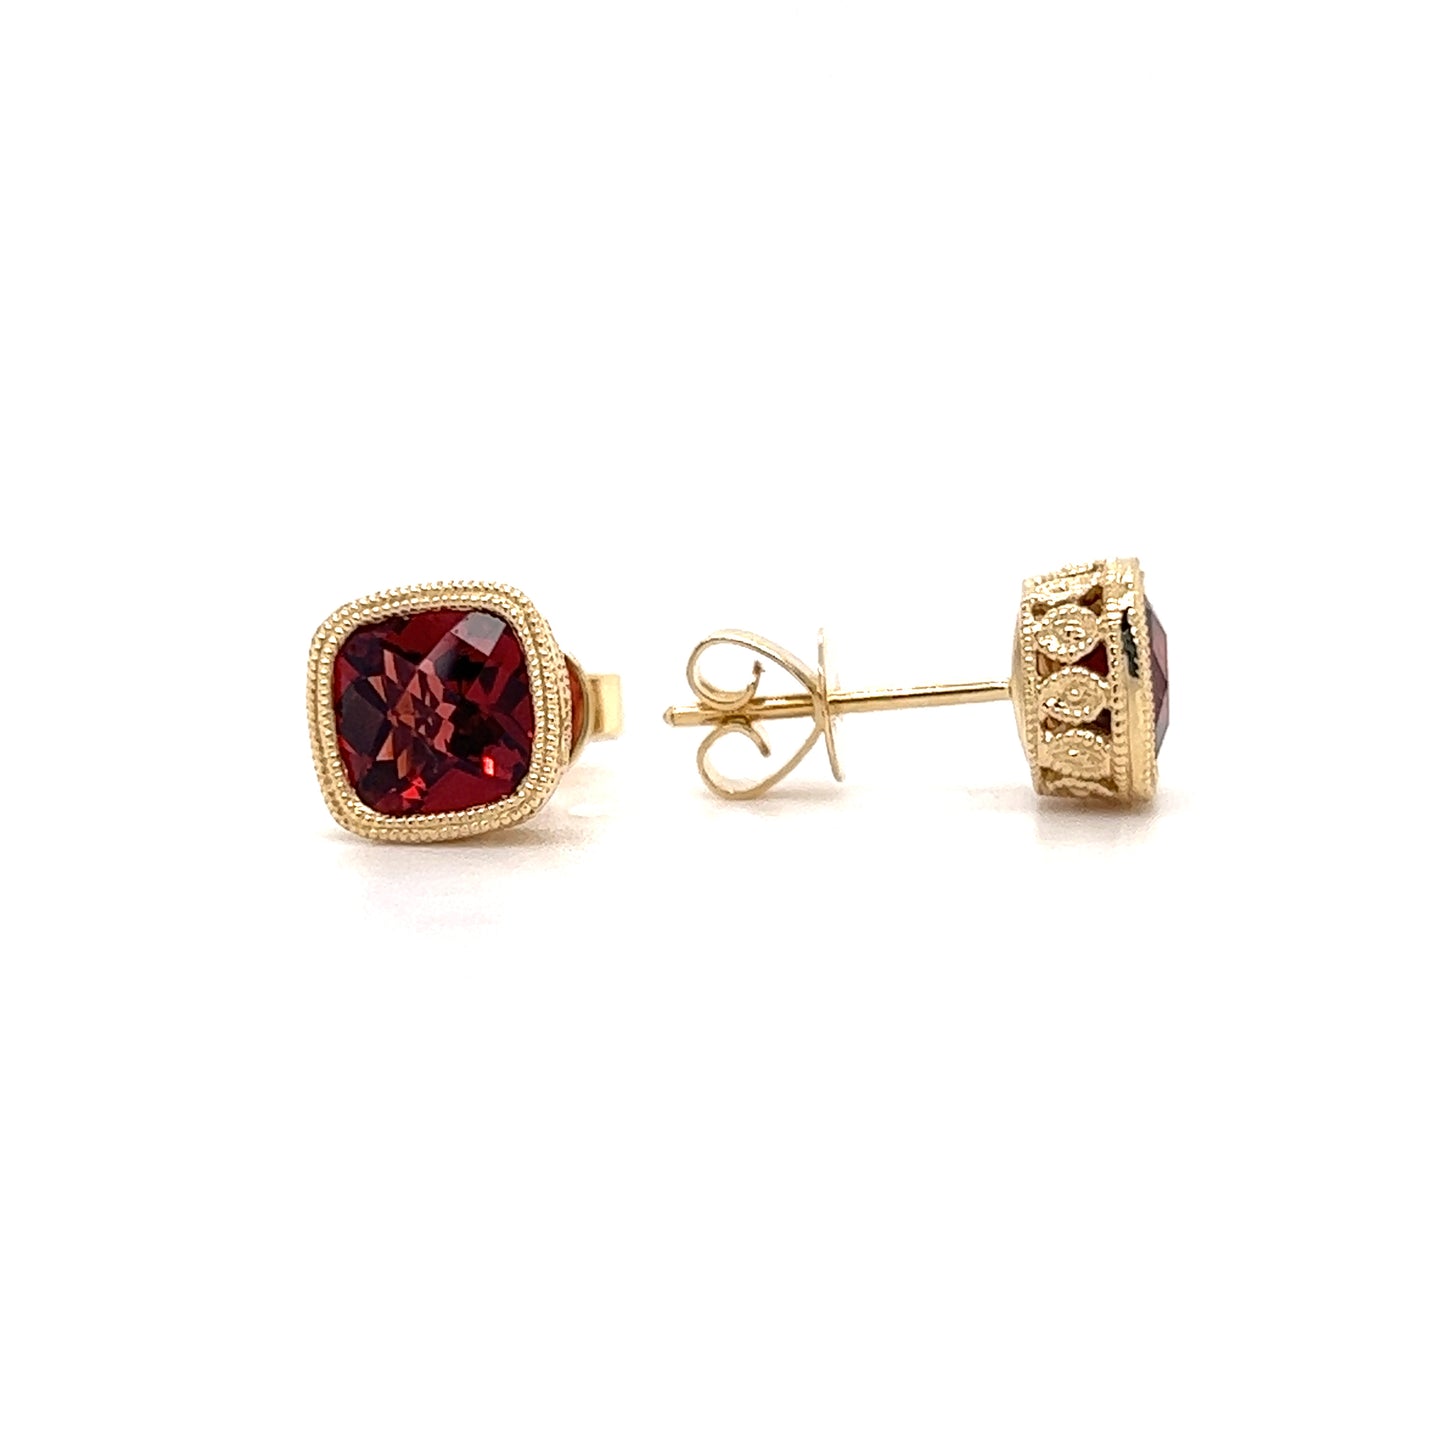 Garnet Stud Earrings with Milgrain and Filigree in 14K Yellow Gold Front and Side View